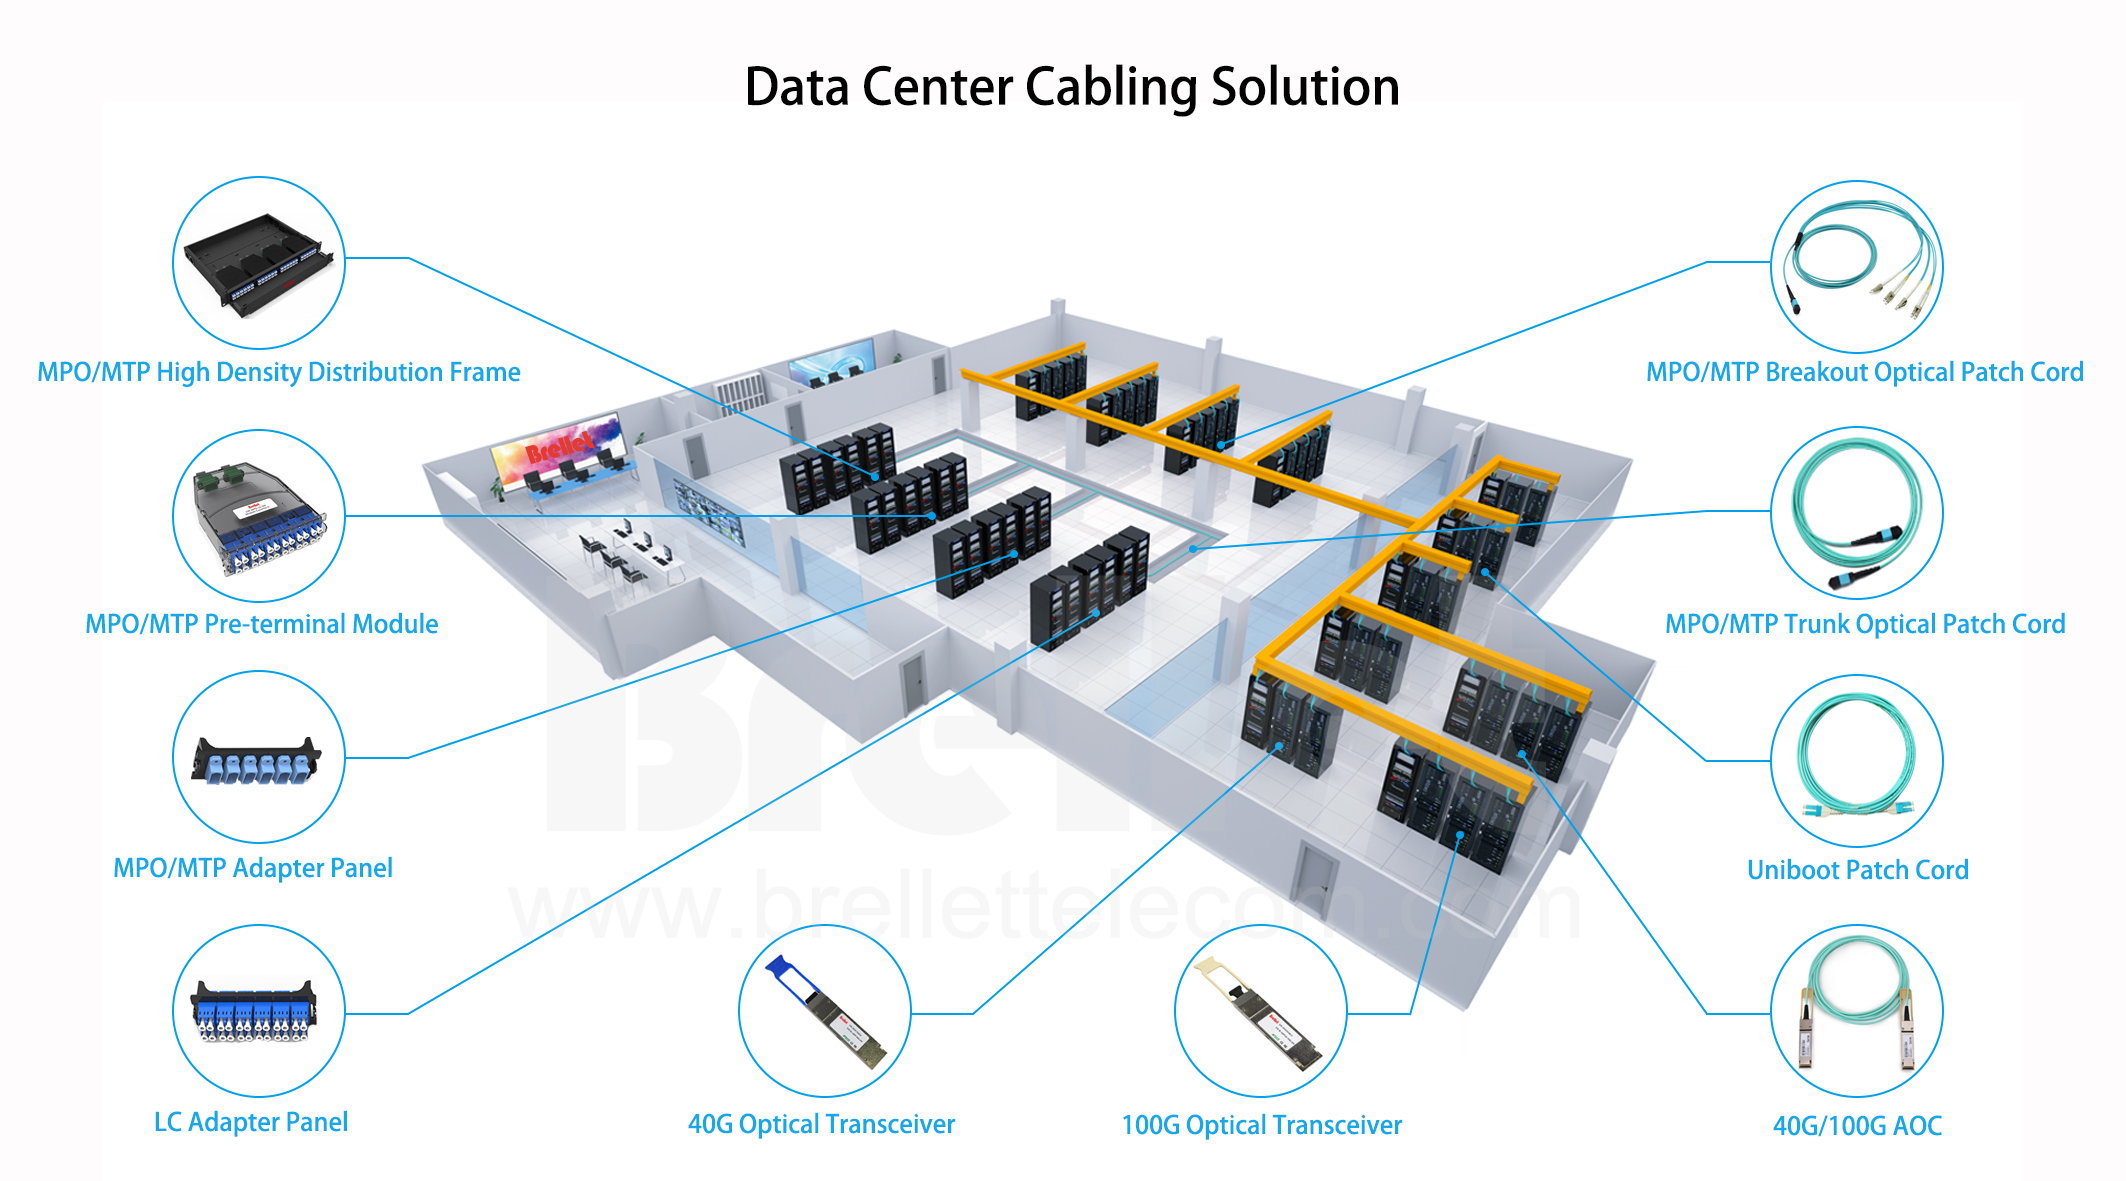 Data Center Cabling Solution